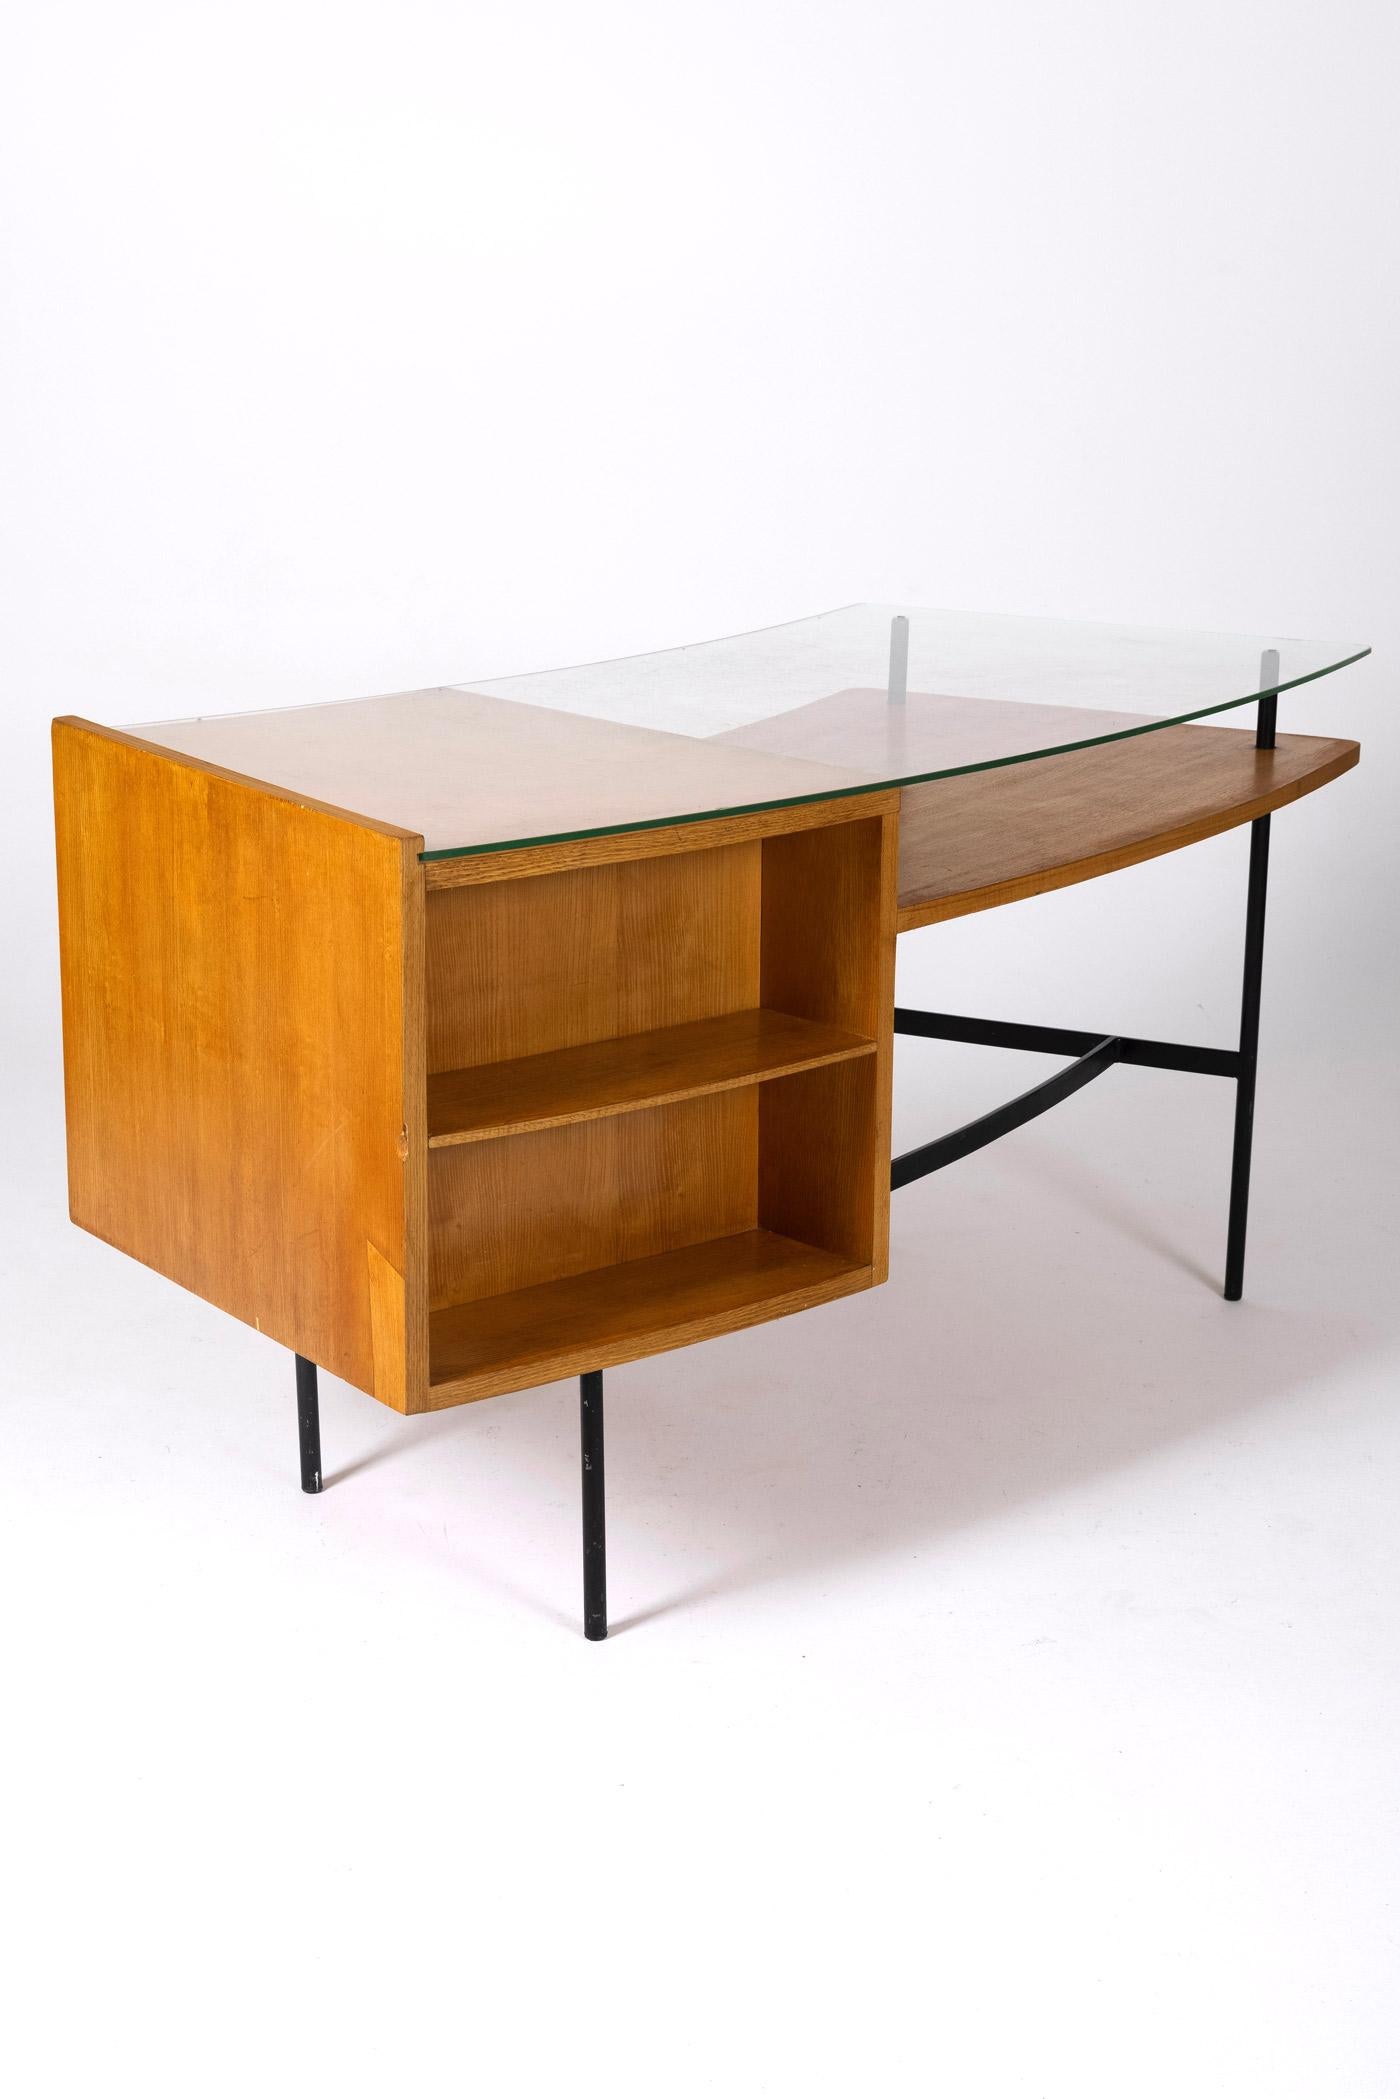 Wood and glass desk by Jean René Picard, 1960s 4